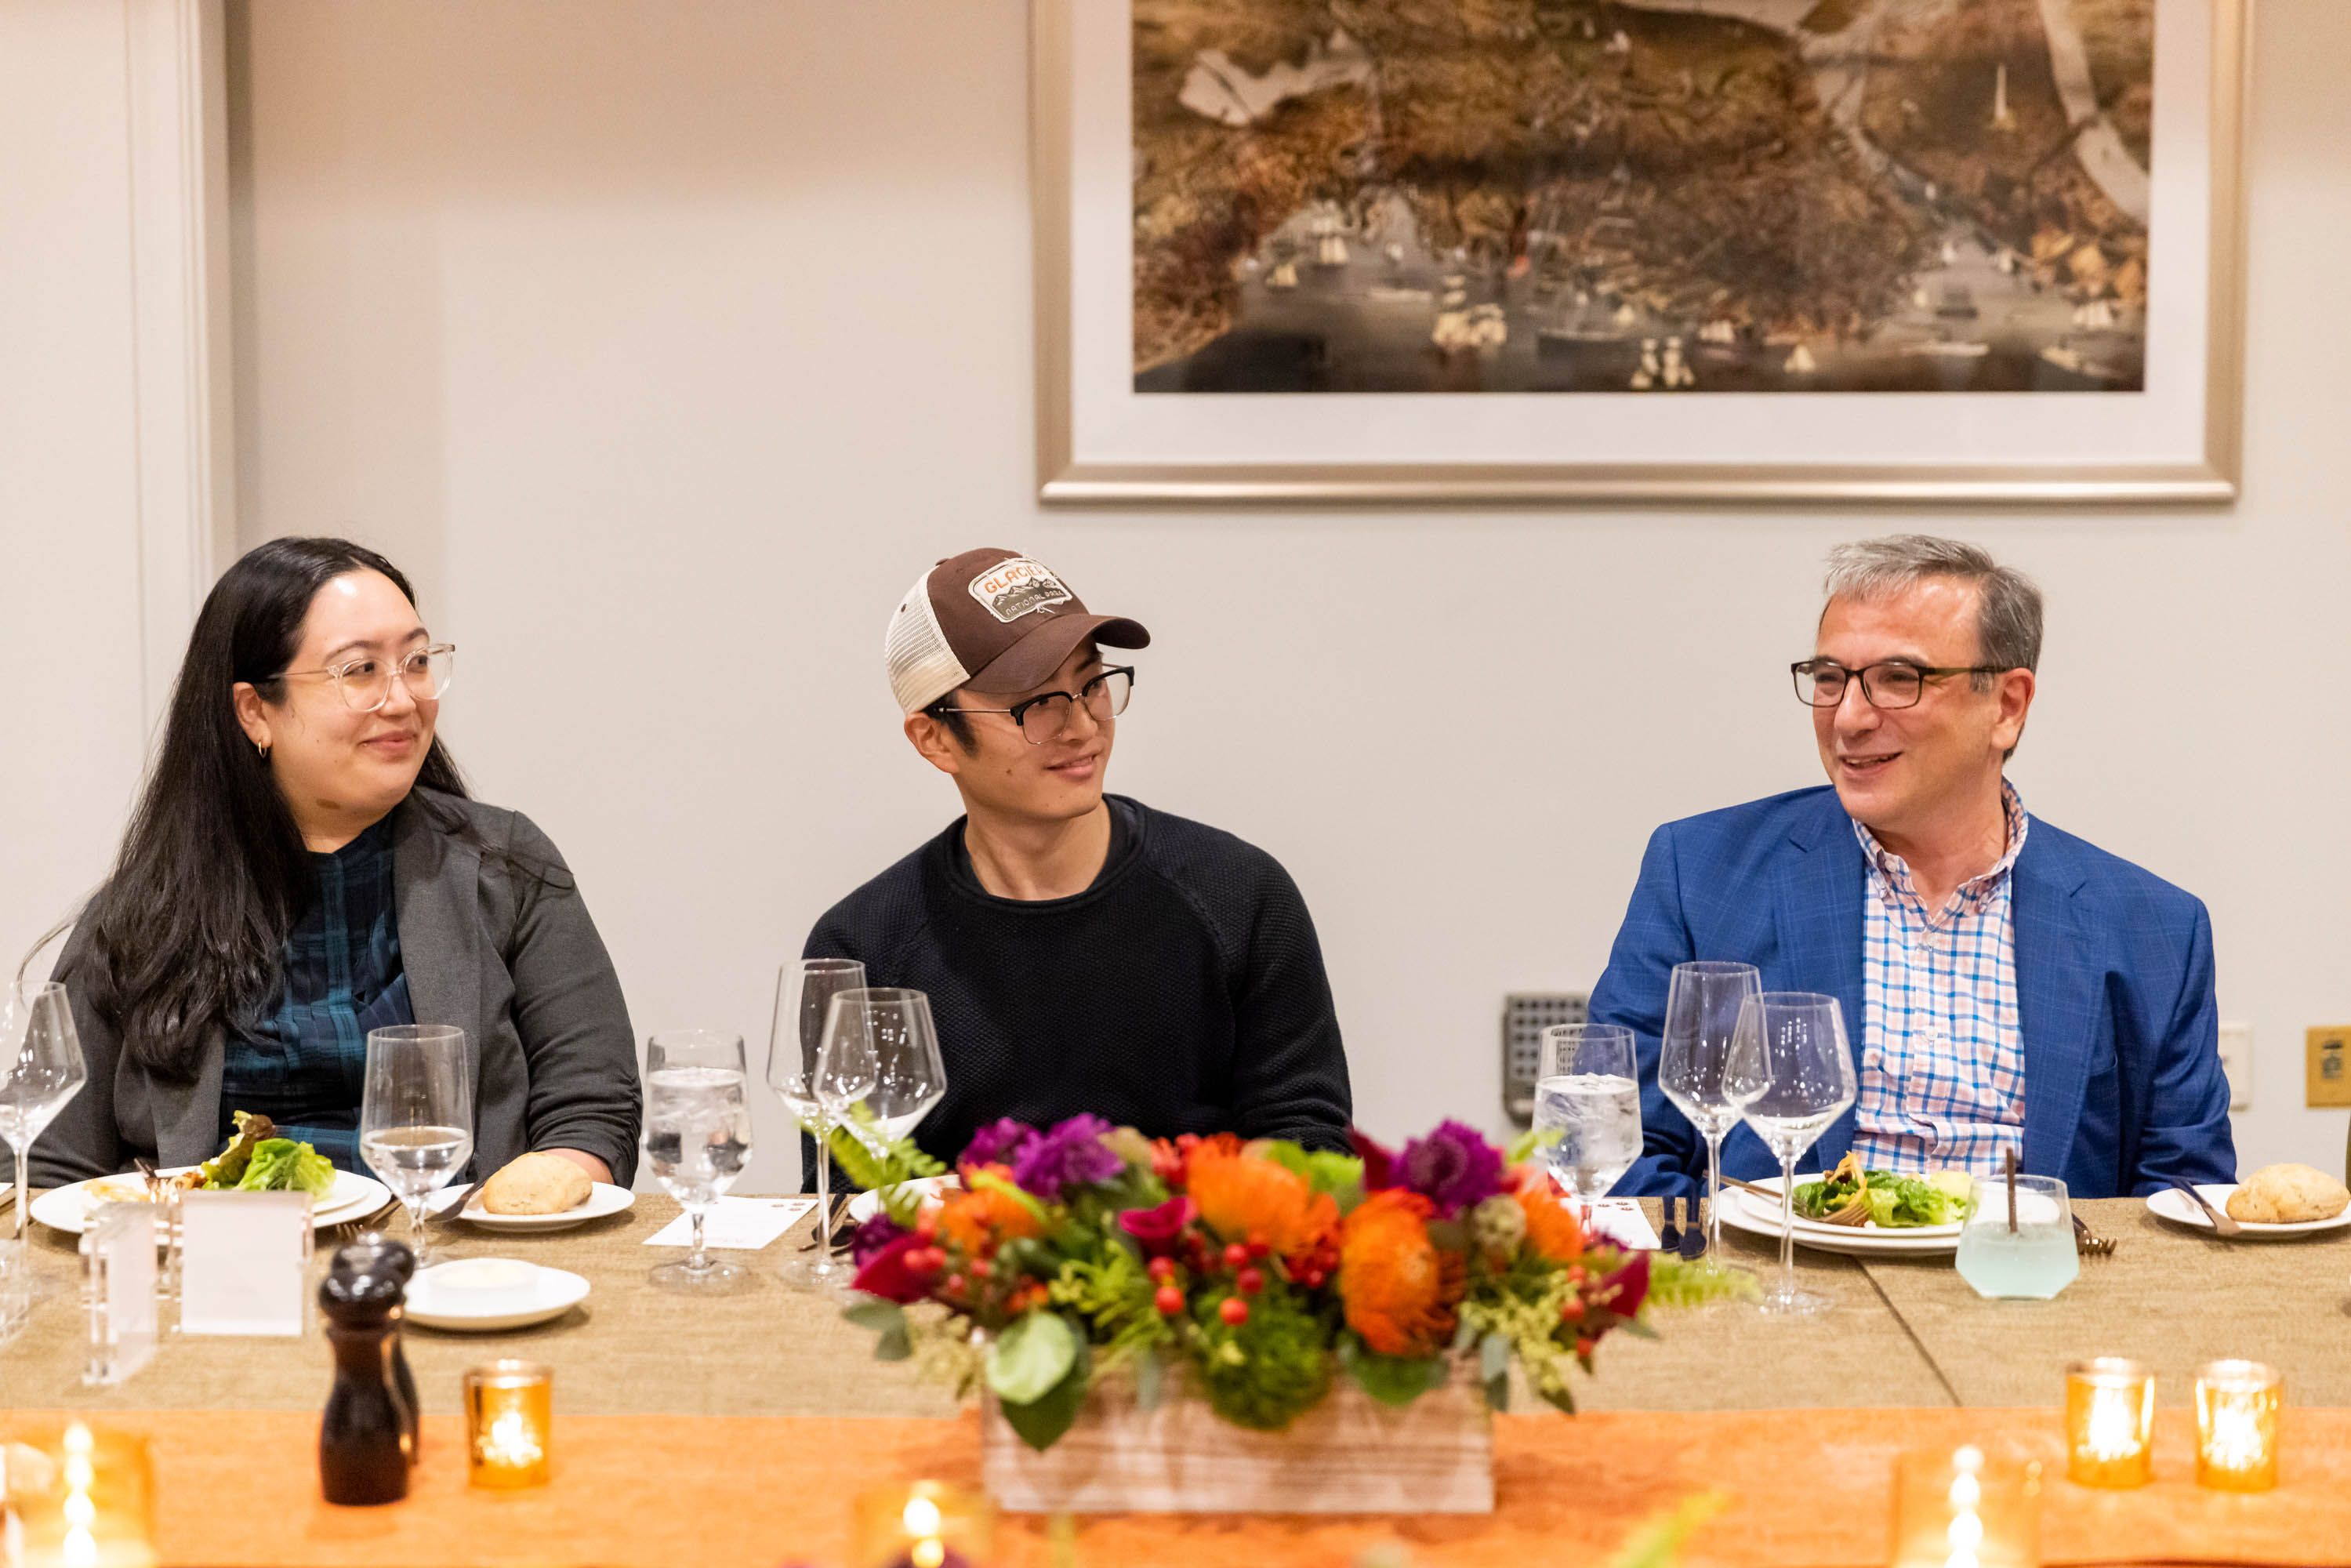 Joe Zhou, Founder & CEO of Mana Interactive Inc., sits at the Axios table between Jessica Morris, left, and Aaron Pressman.